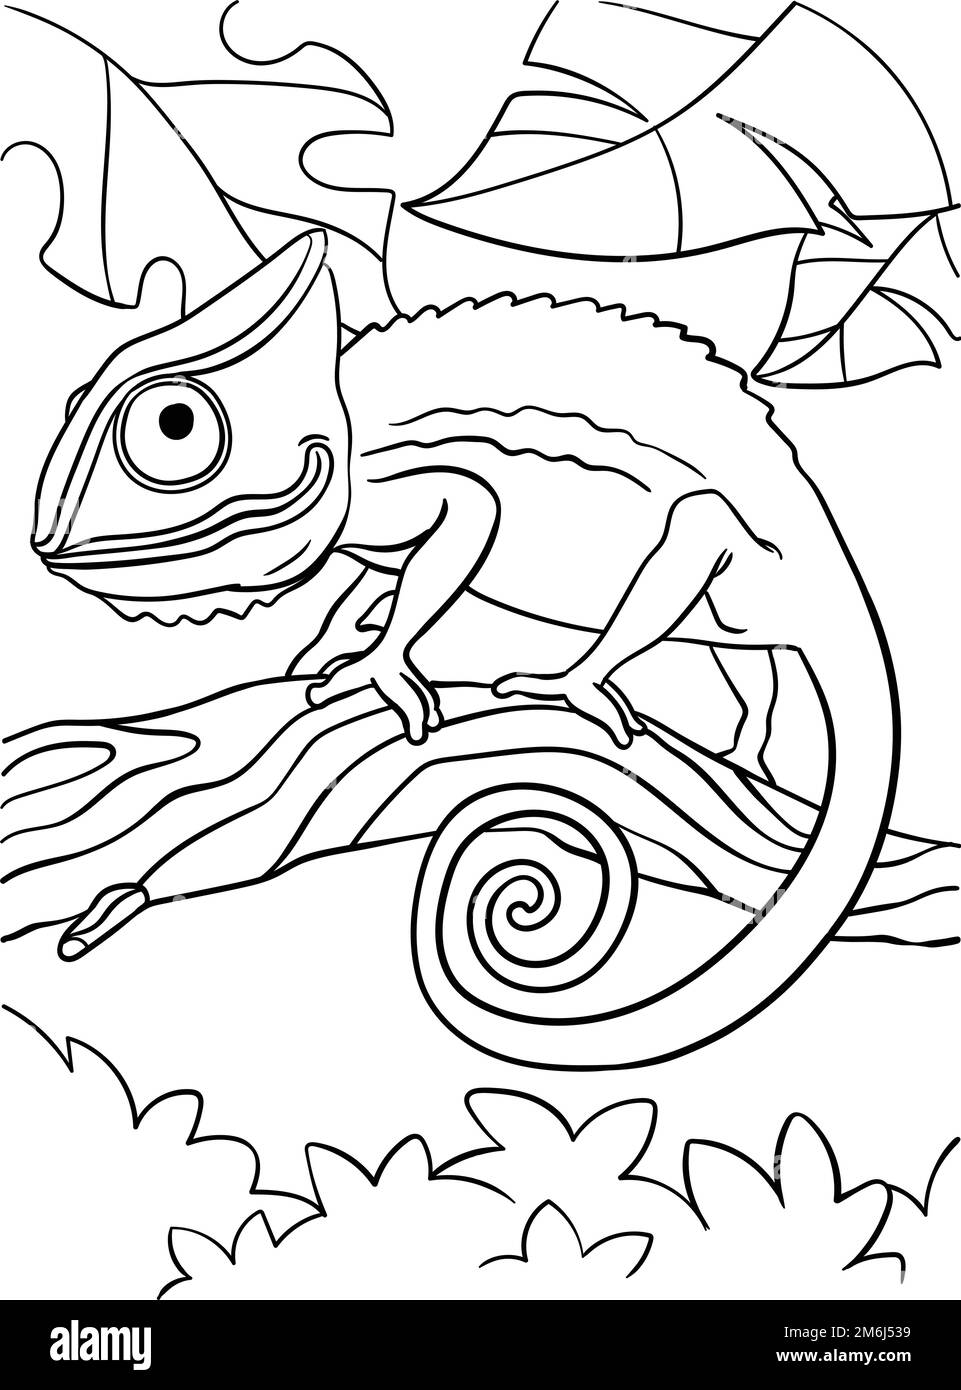 Chameleons Coloring Page for Kids Stock Vector Image & Art - Alamy